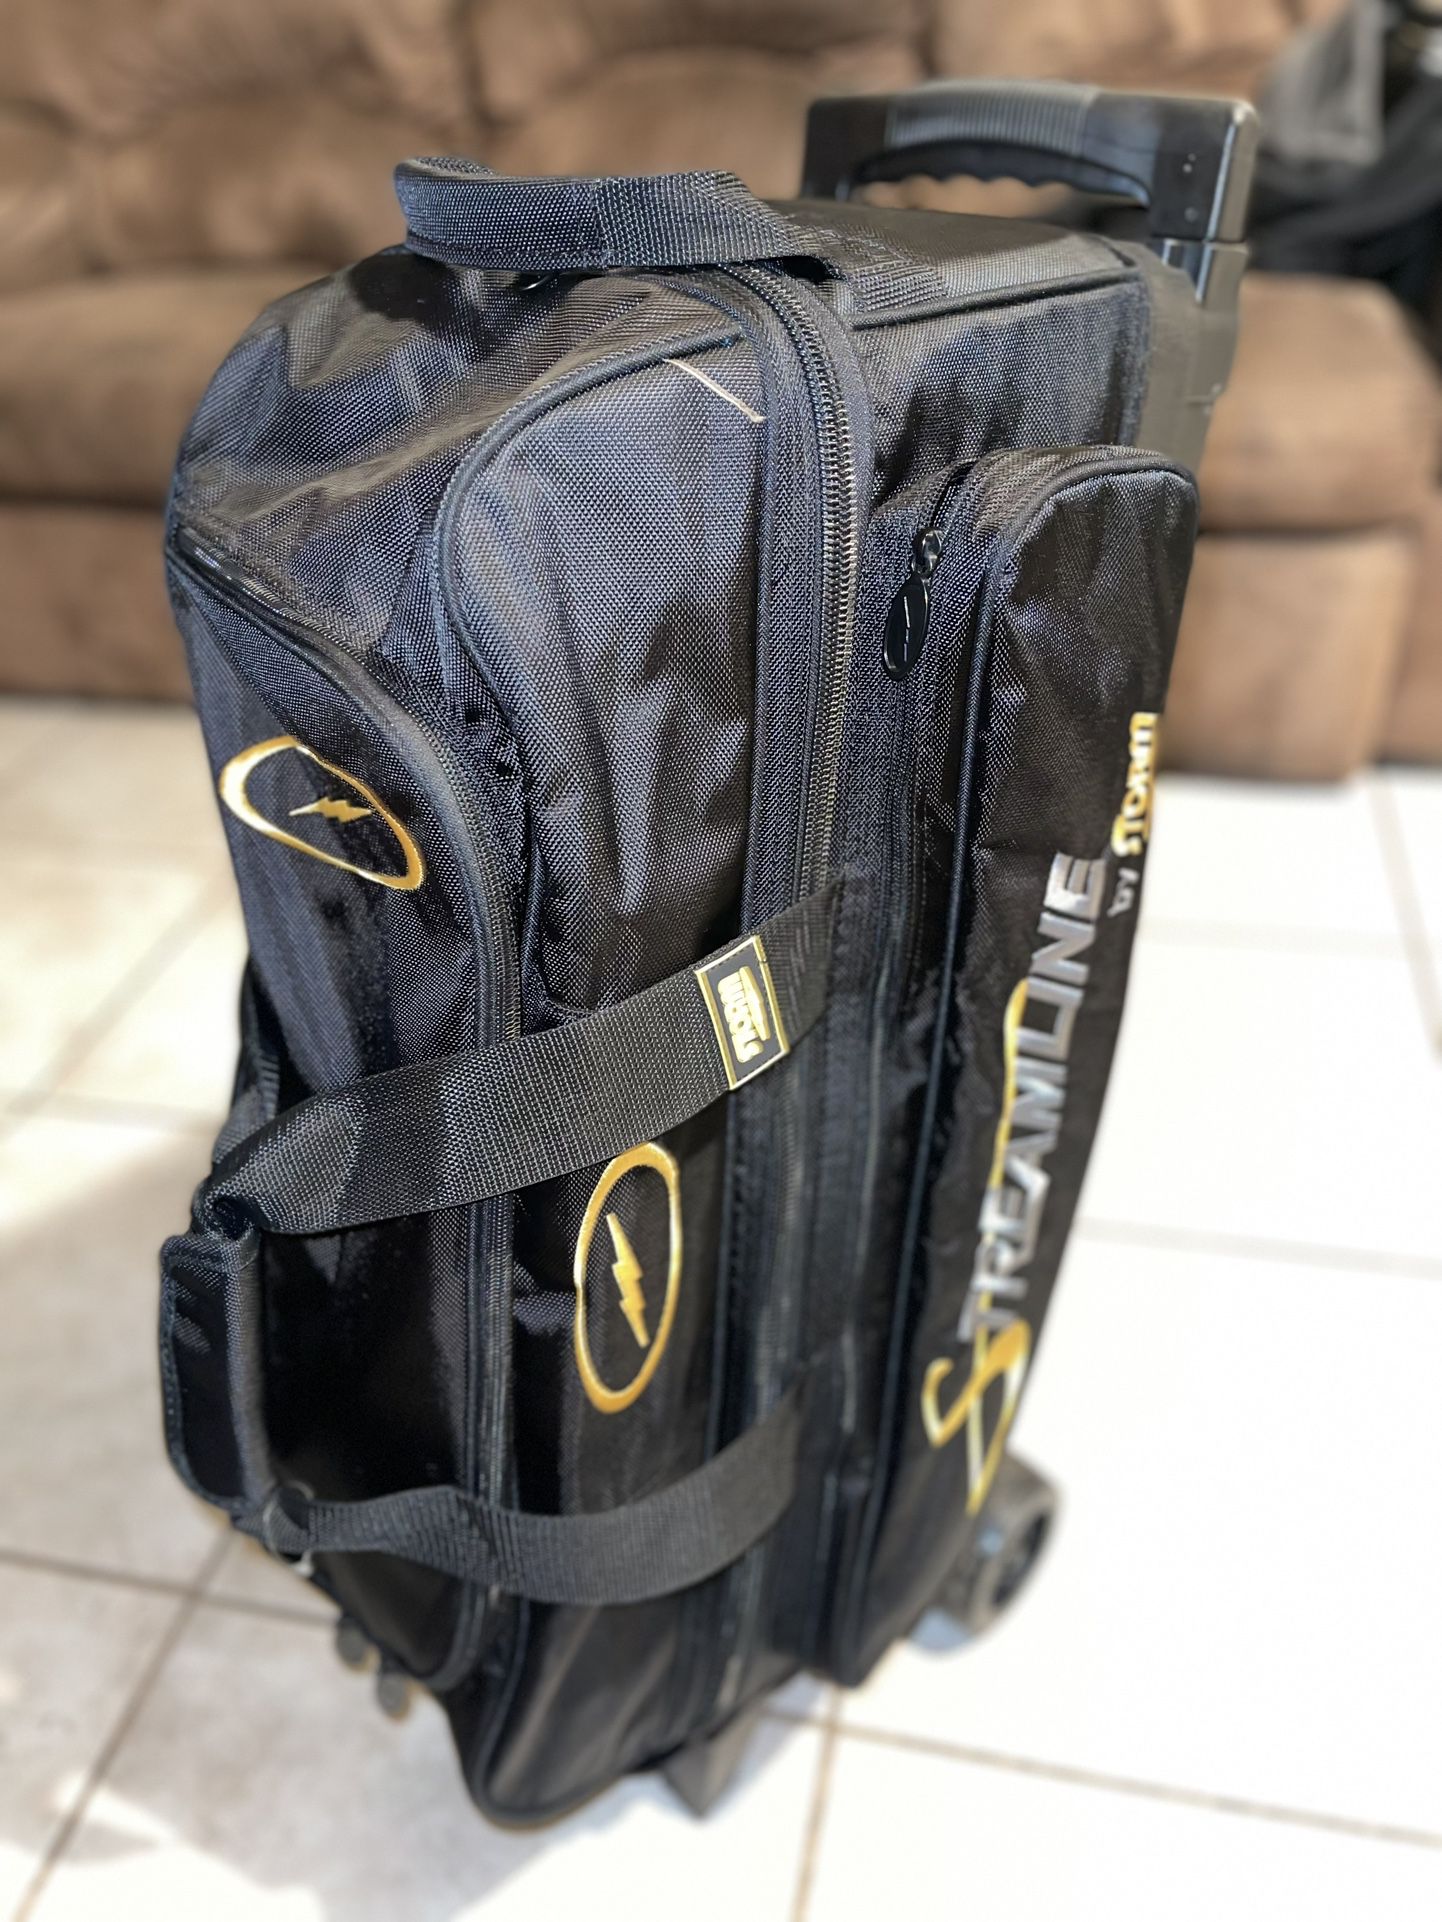 Storm 3 Ball Bowling Bag for Sale in Oxnard, CA - OfferUp